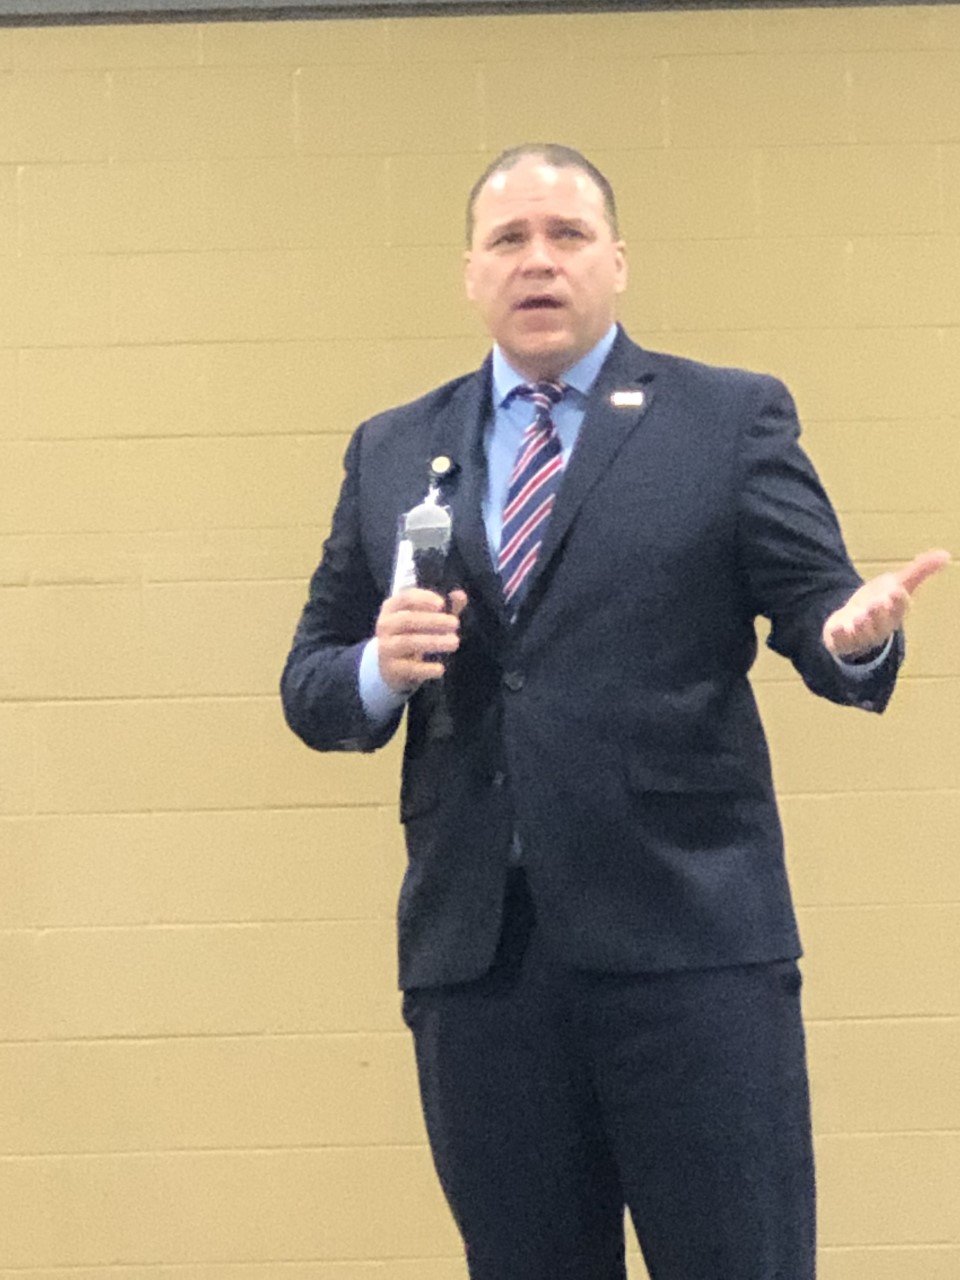 Katy ISD Superintendent Ken Gregorski talks about the district’s tax ratification election, called a TRE, that is on the November general ballot. Gregorski said if voters approve the TRE, the money raised would go towards staff and faculty pay raises.